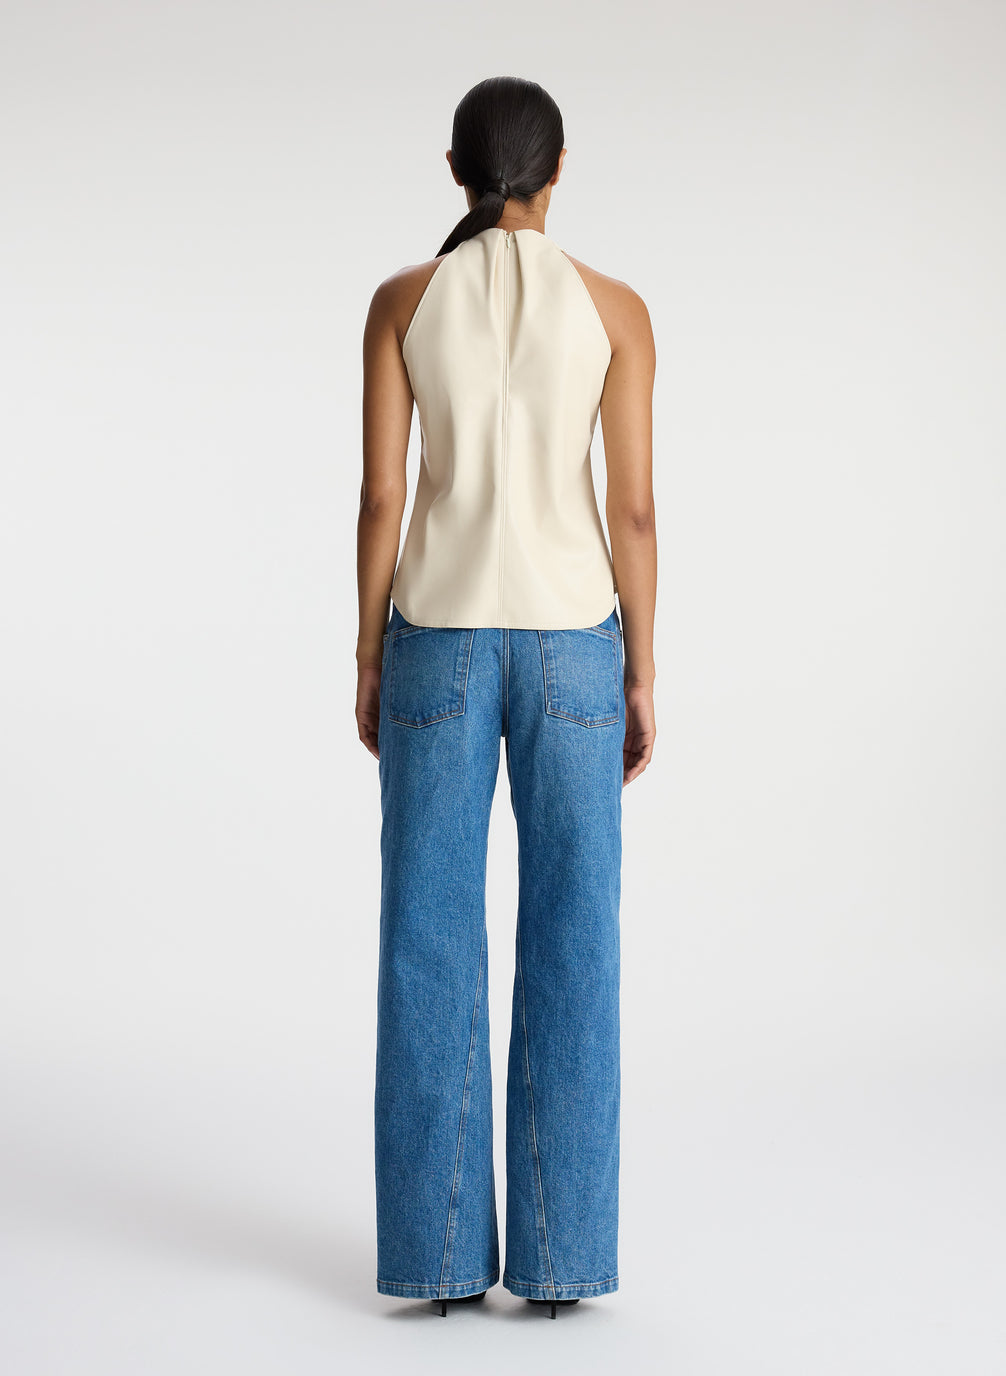 back view of woman wearing cream vegan leather halter top and medium blue wash denim jeans